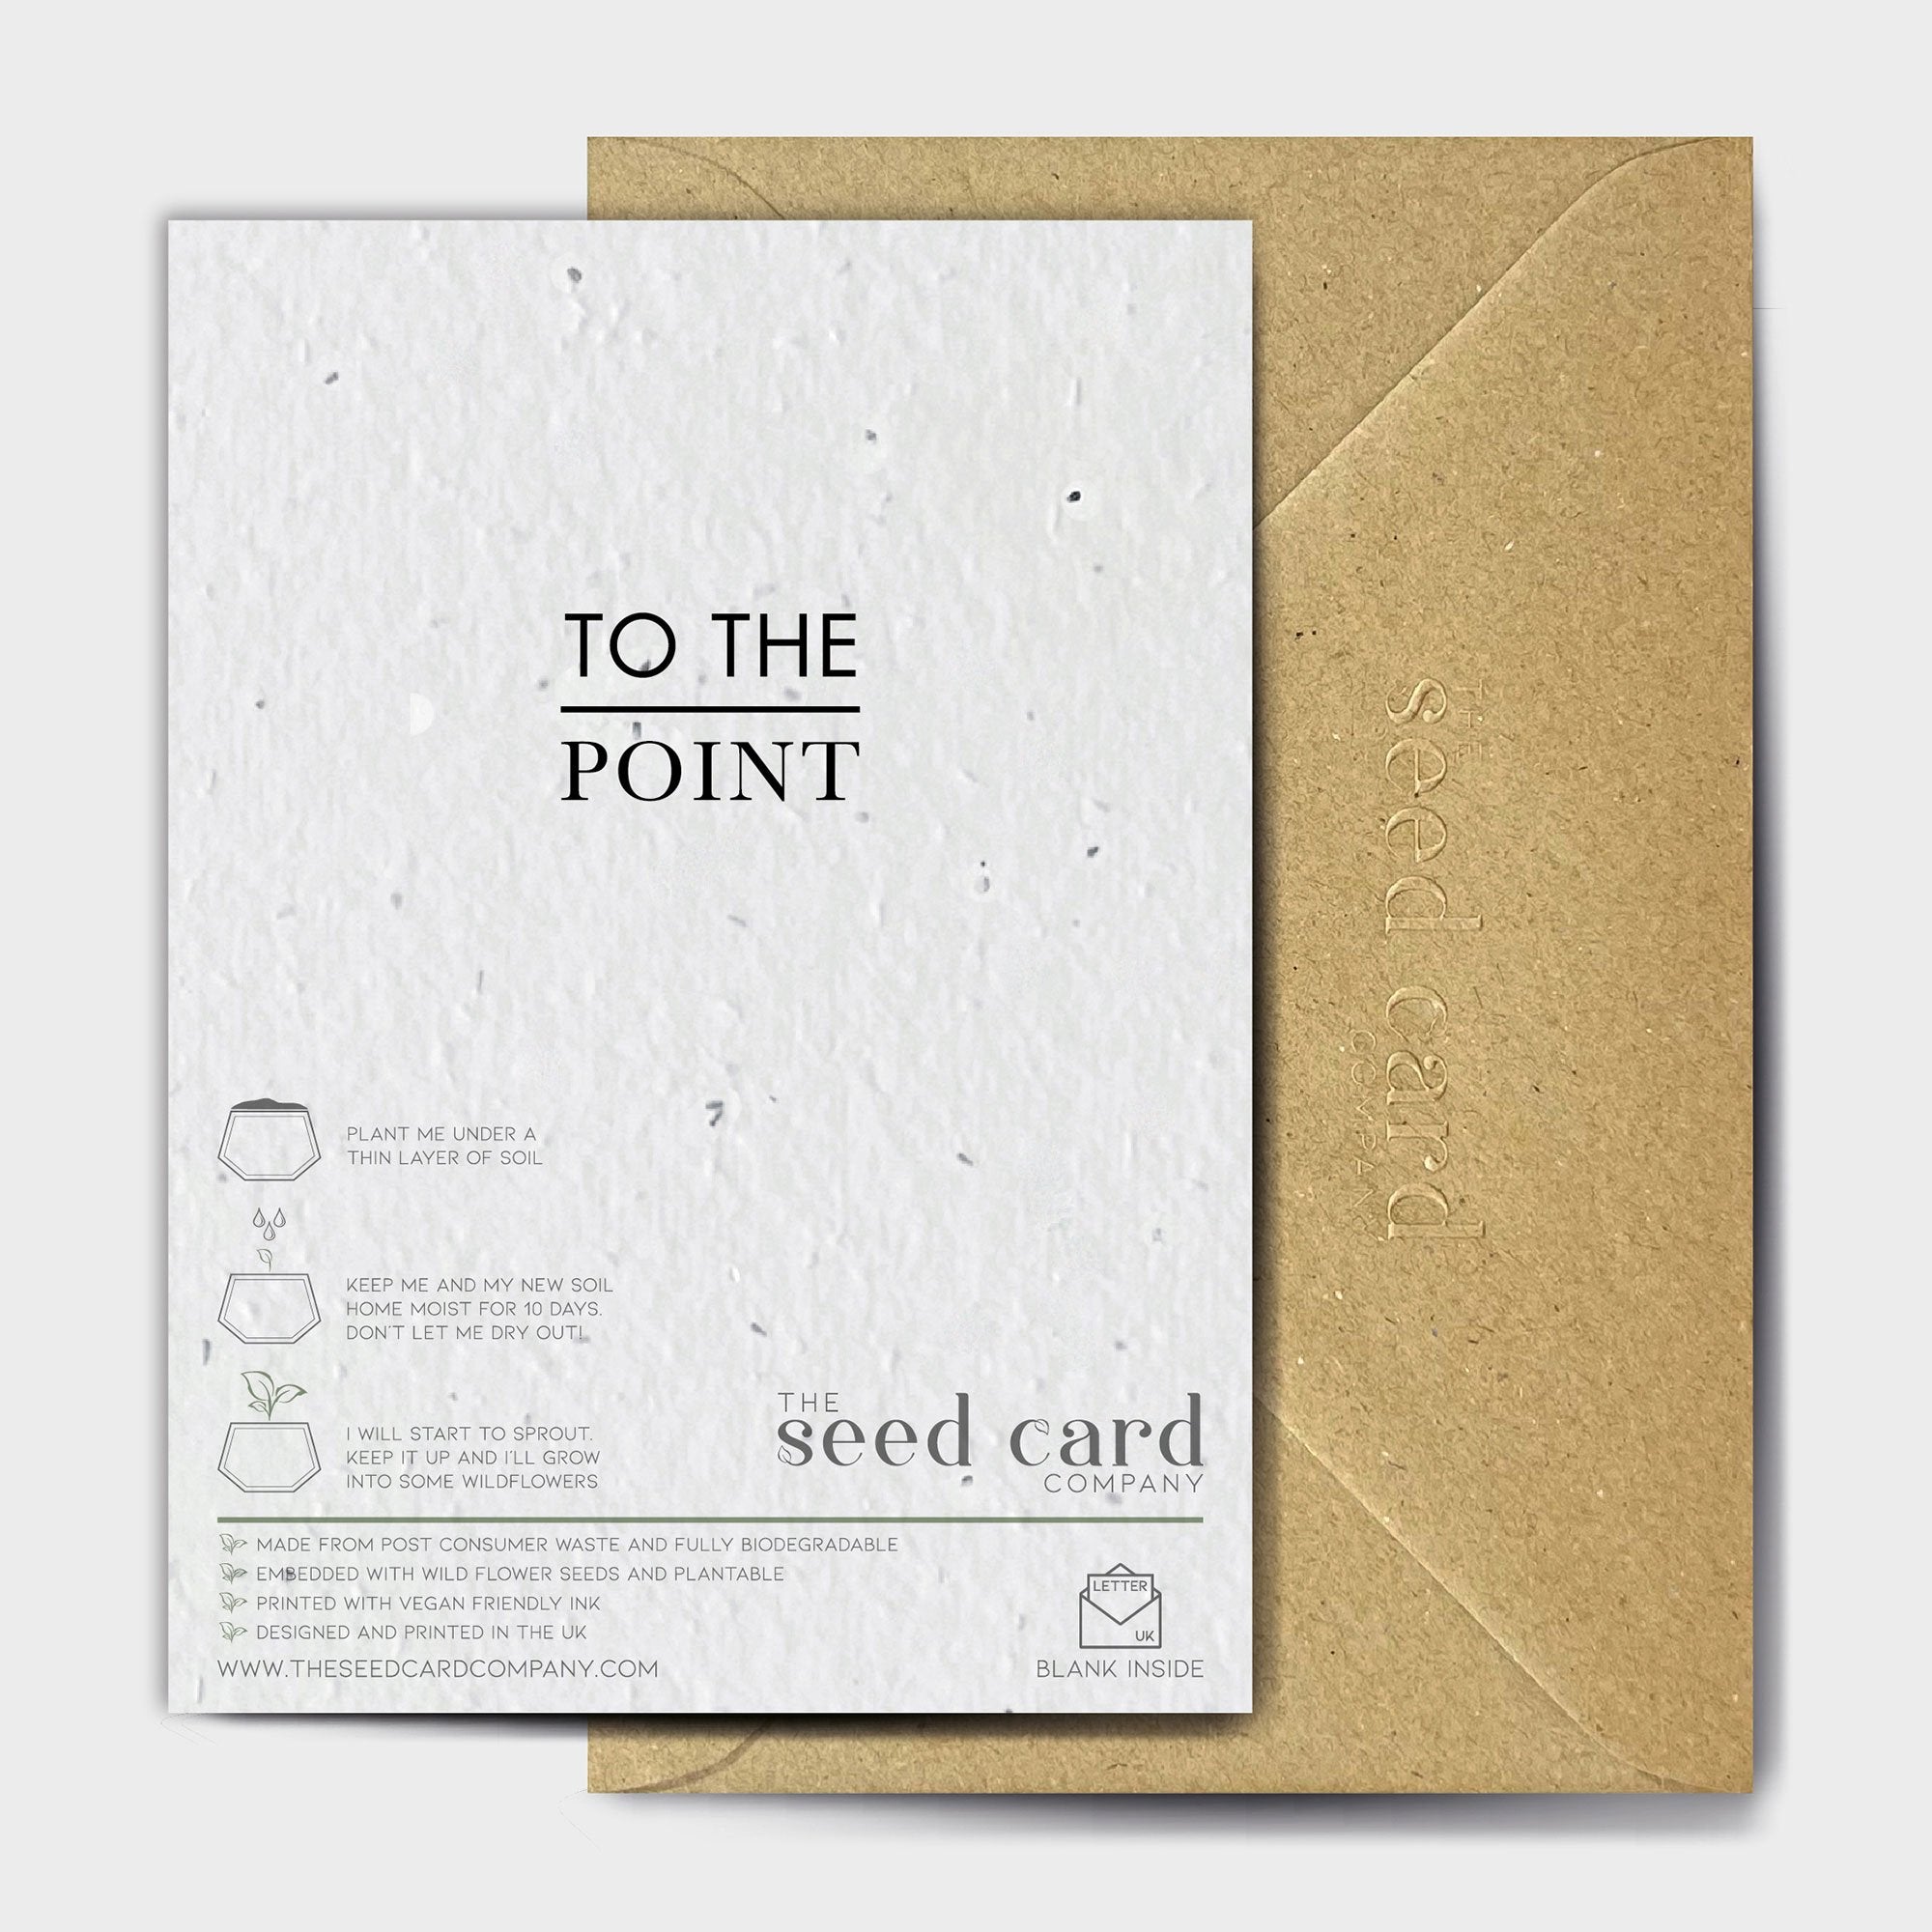 Shop online Bus Pass Bragging Rights - 100% biodegradable seed-embedded cards Shop -The Seed Card Company